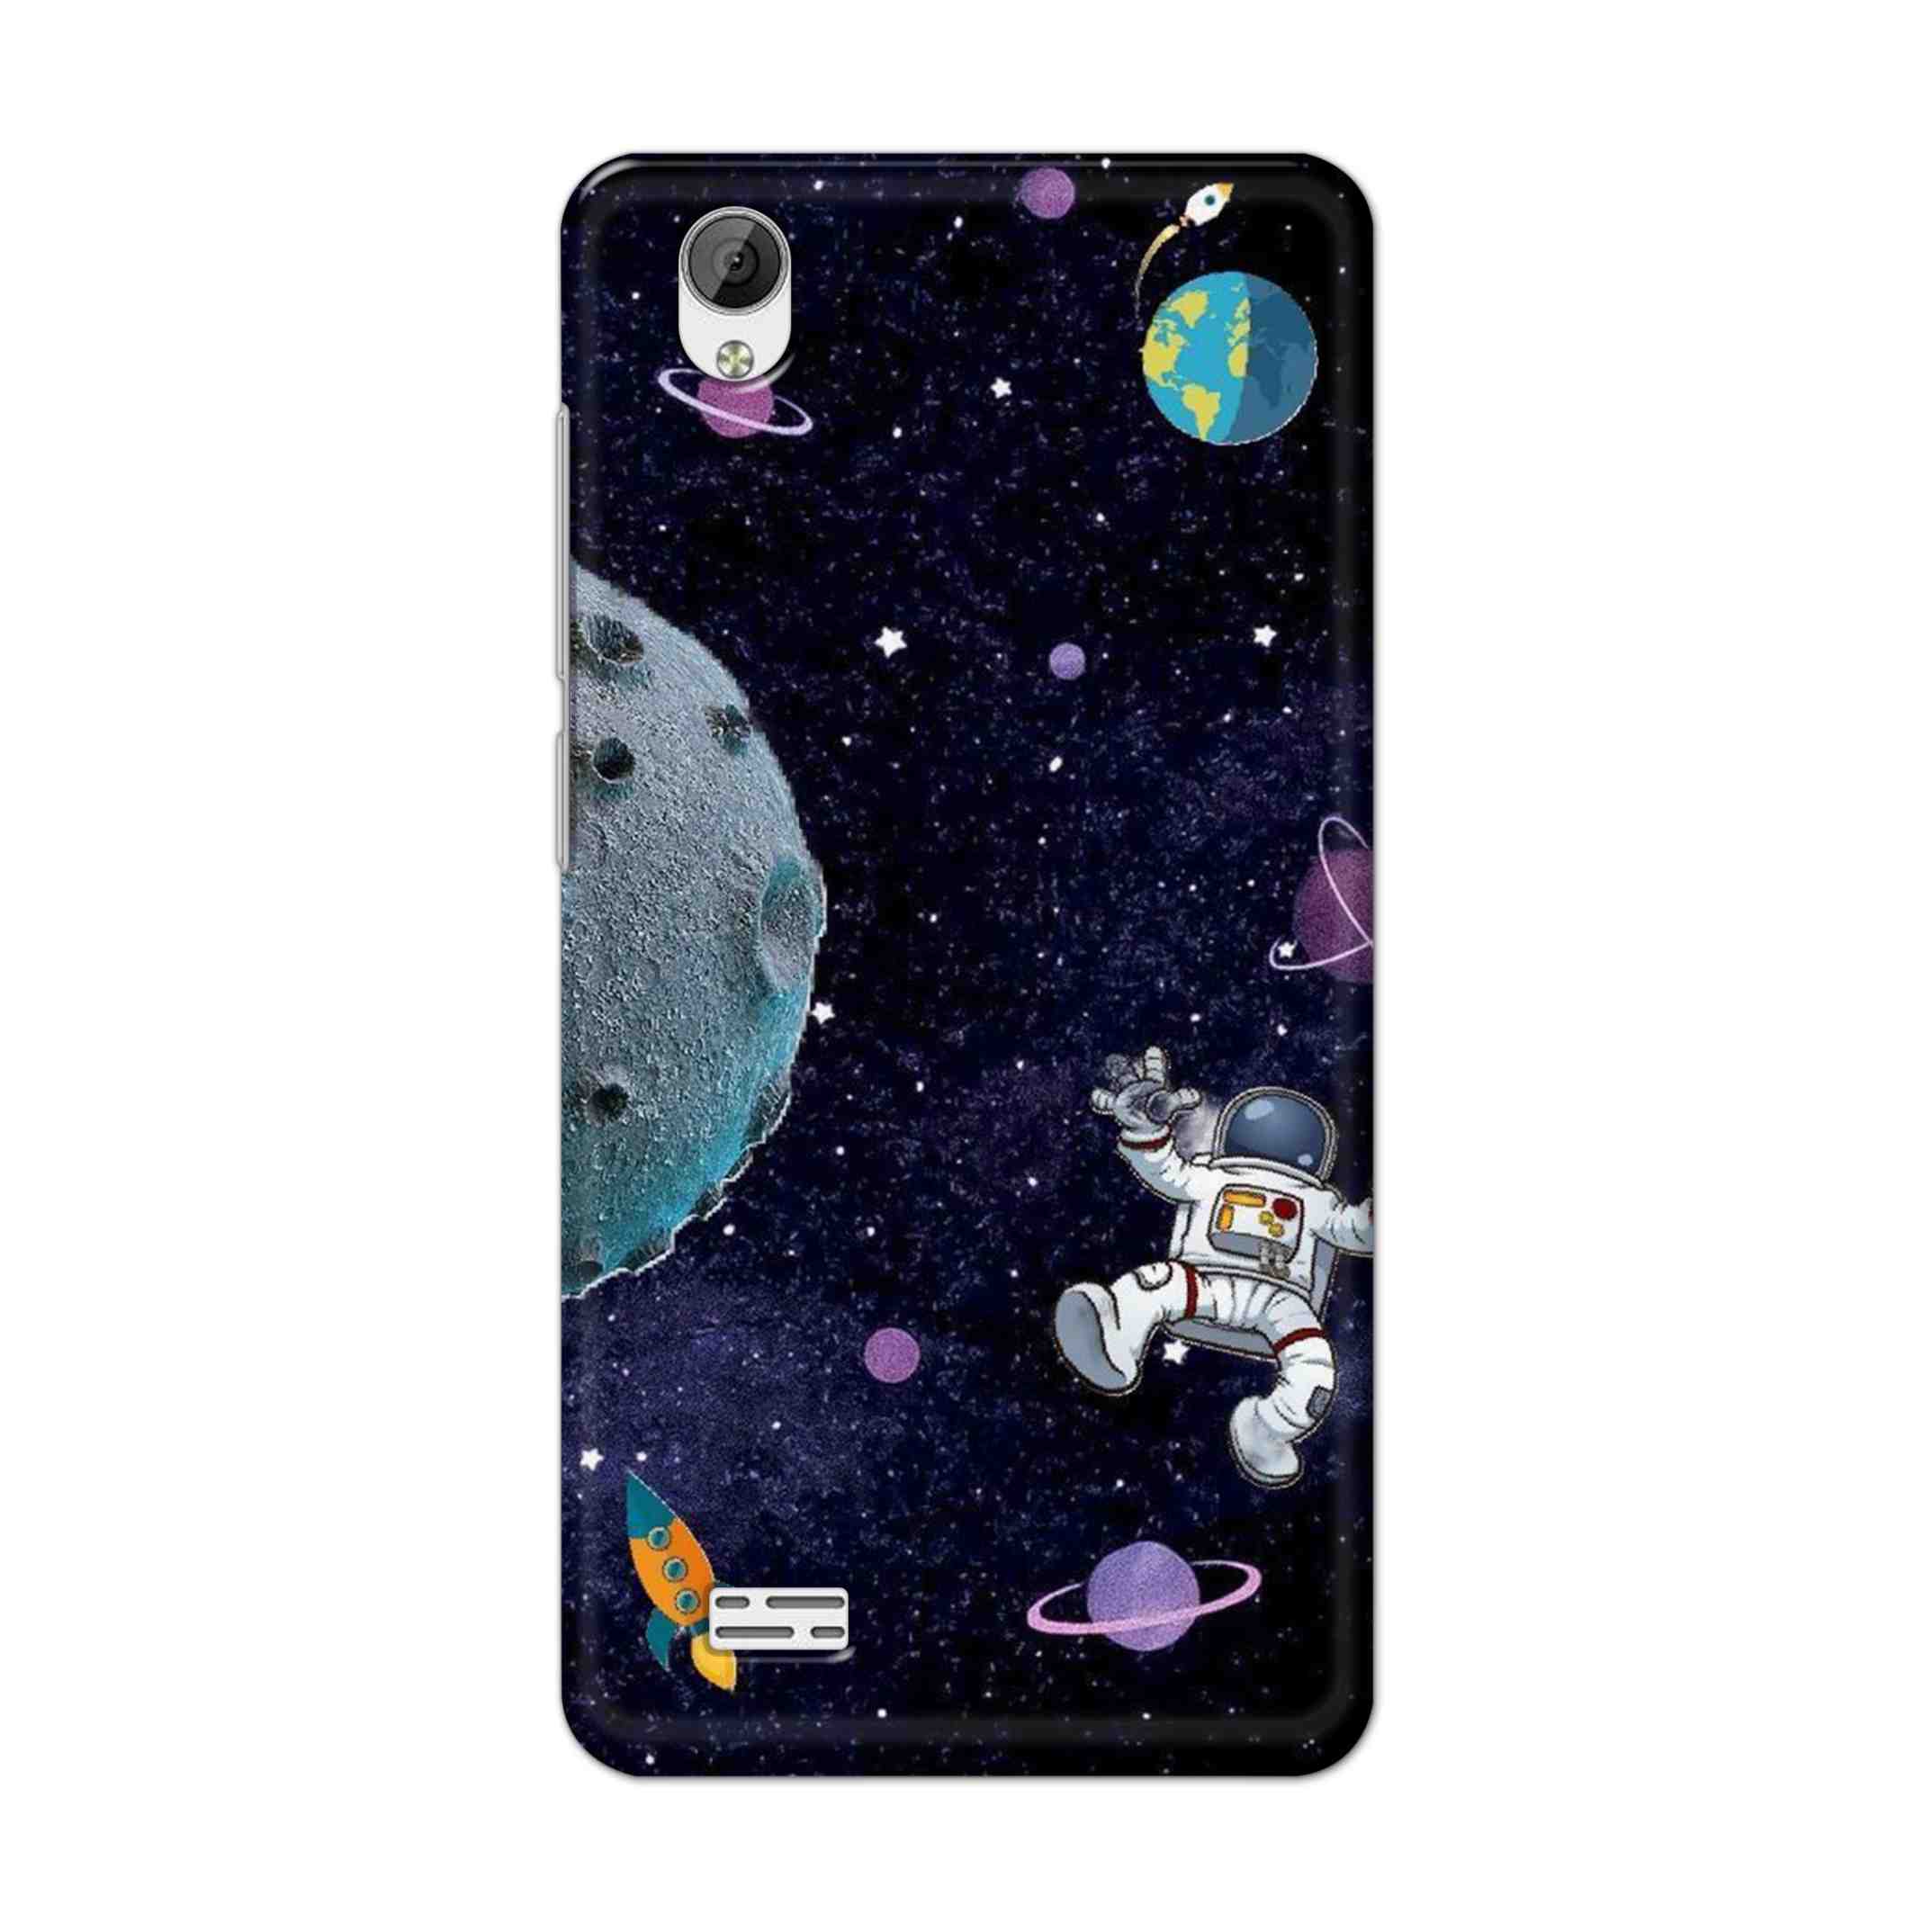 Buy Space Hard Back Mobile Phone Case Cover For Vivo Y31 Online